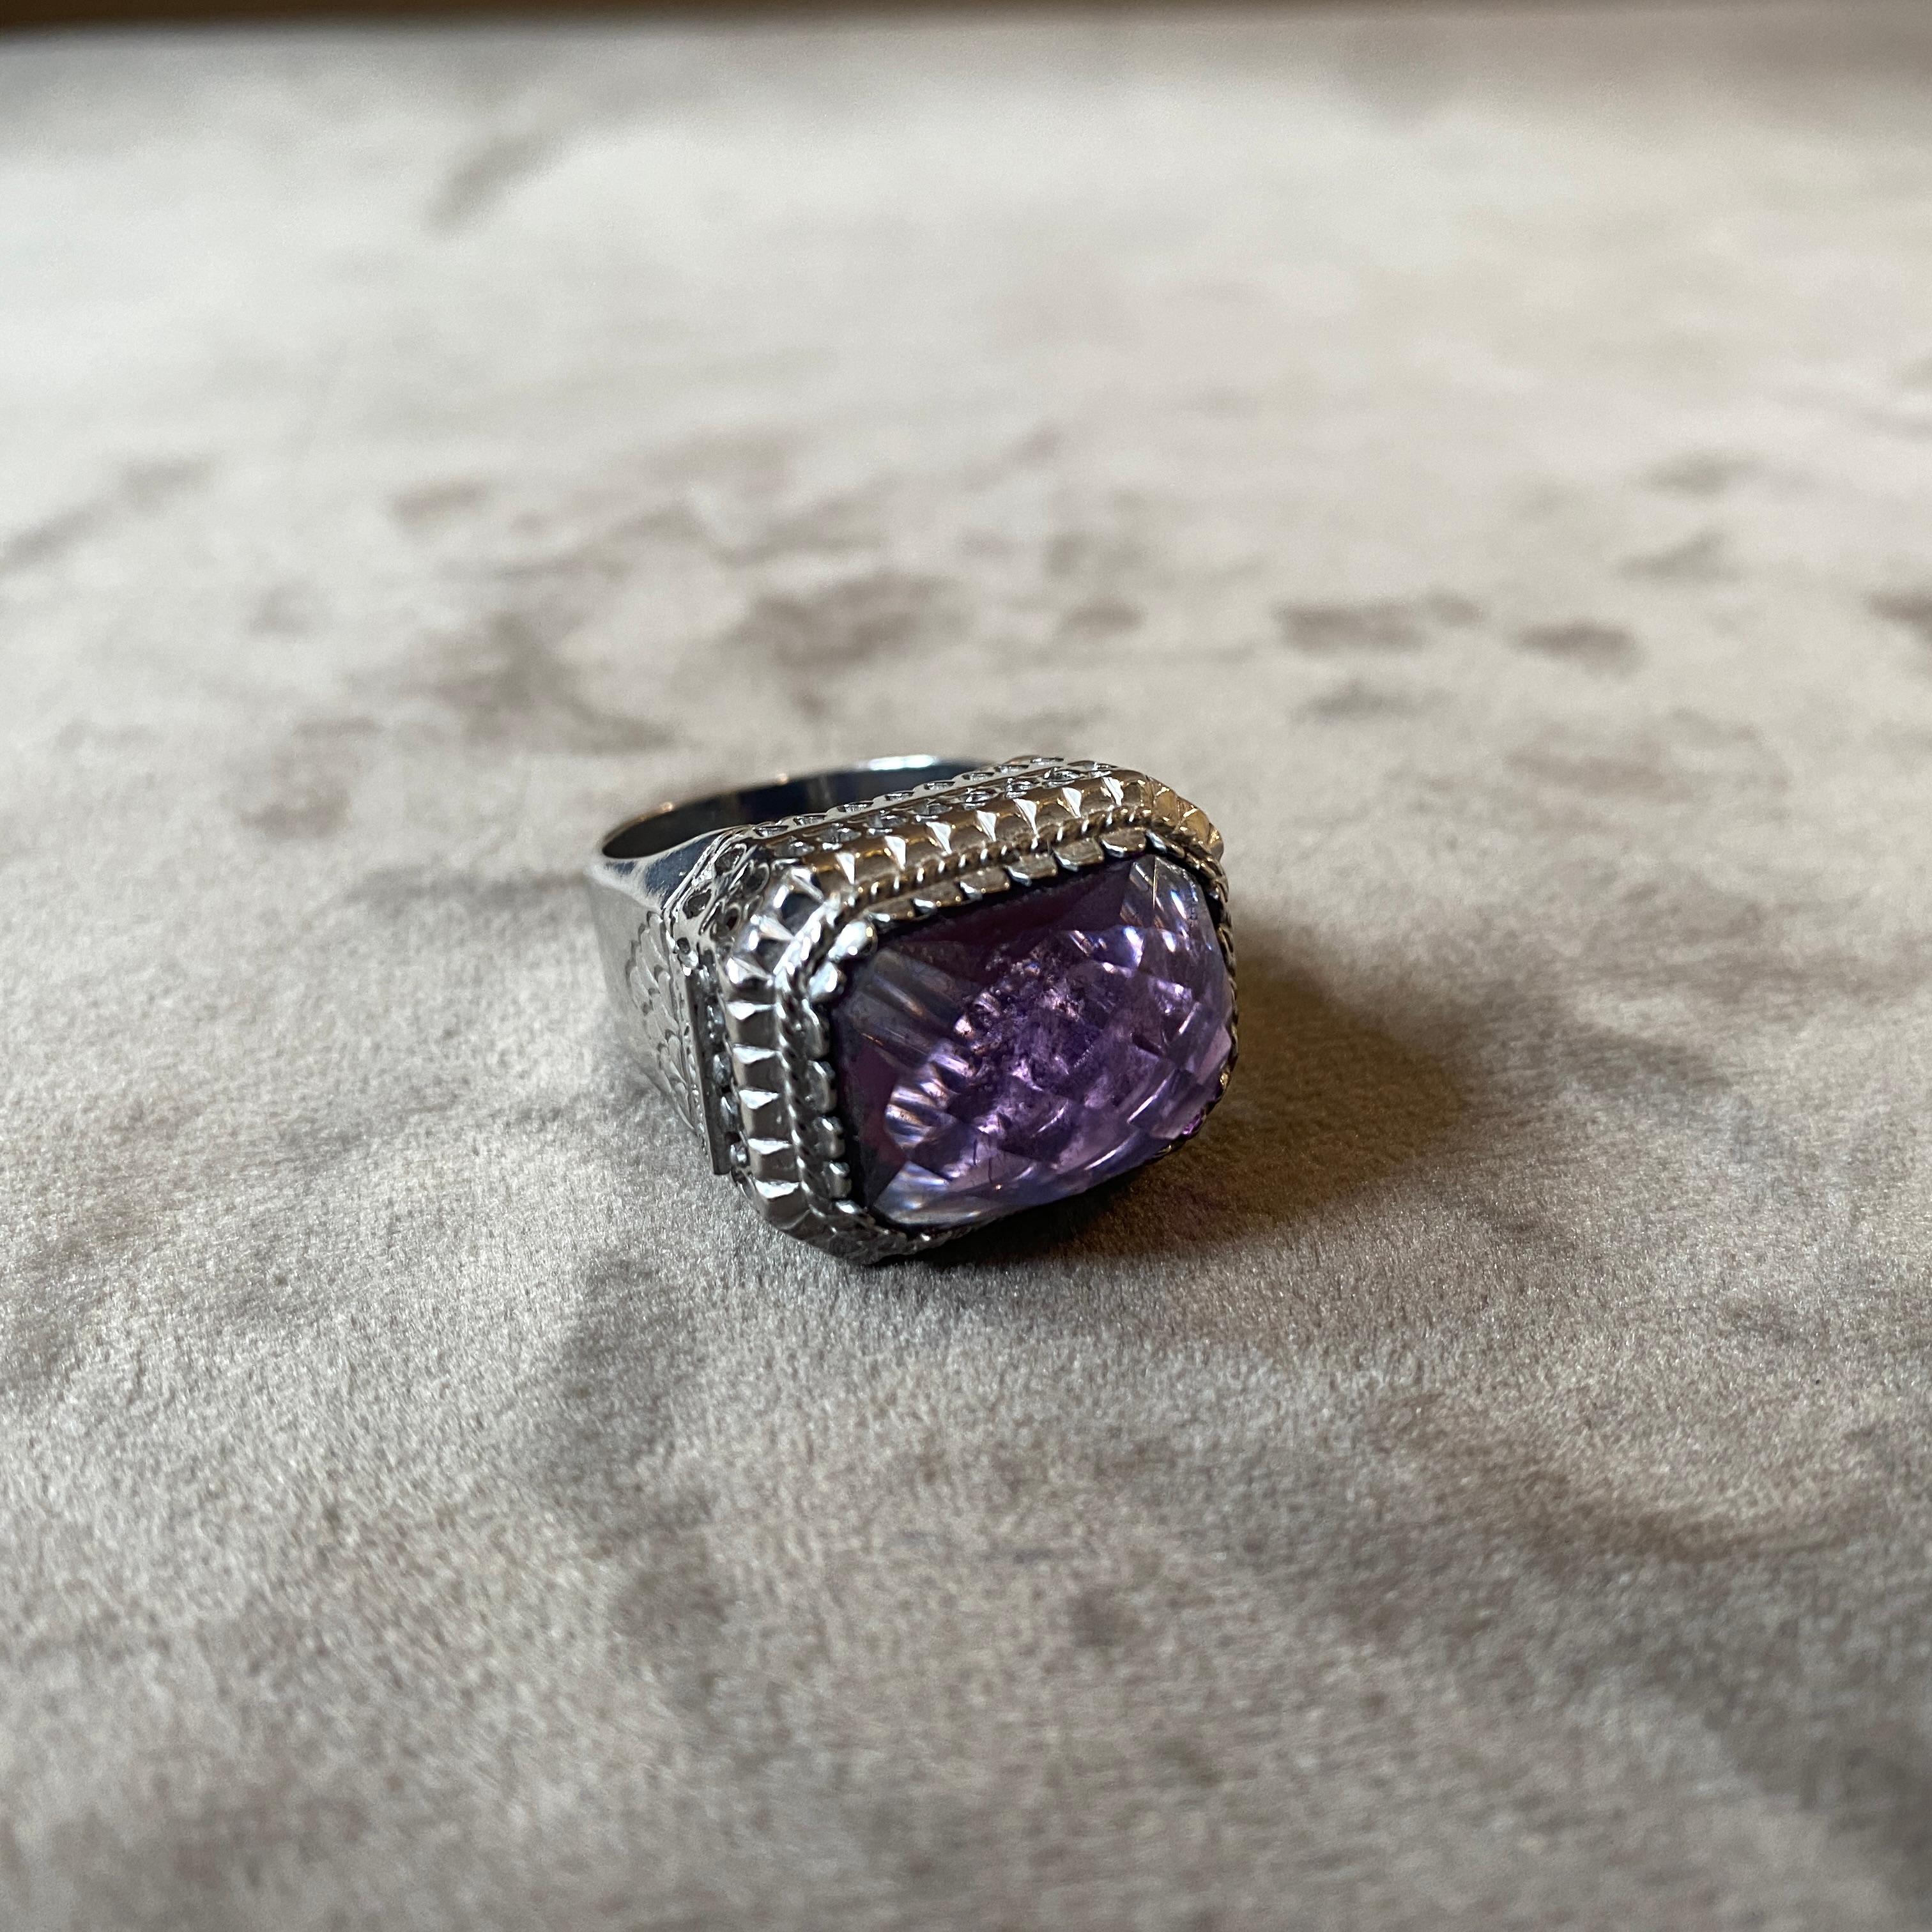 An hand-crafted cocktail ring manufactured  in Italy in the Nineties by Anomis, it's in lovely condition, the amethyst color briolette cut hydrothermal quartz and the rhodium plated sterling silver gives it a real jewel look. The Cocktail Ring by